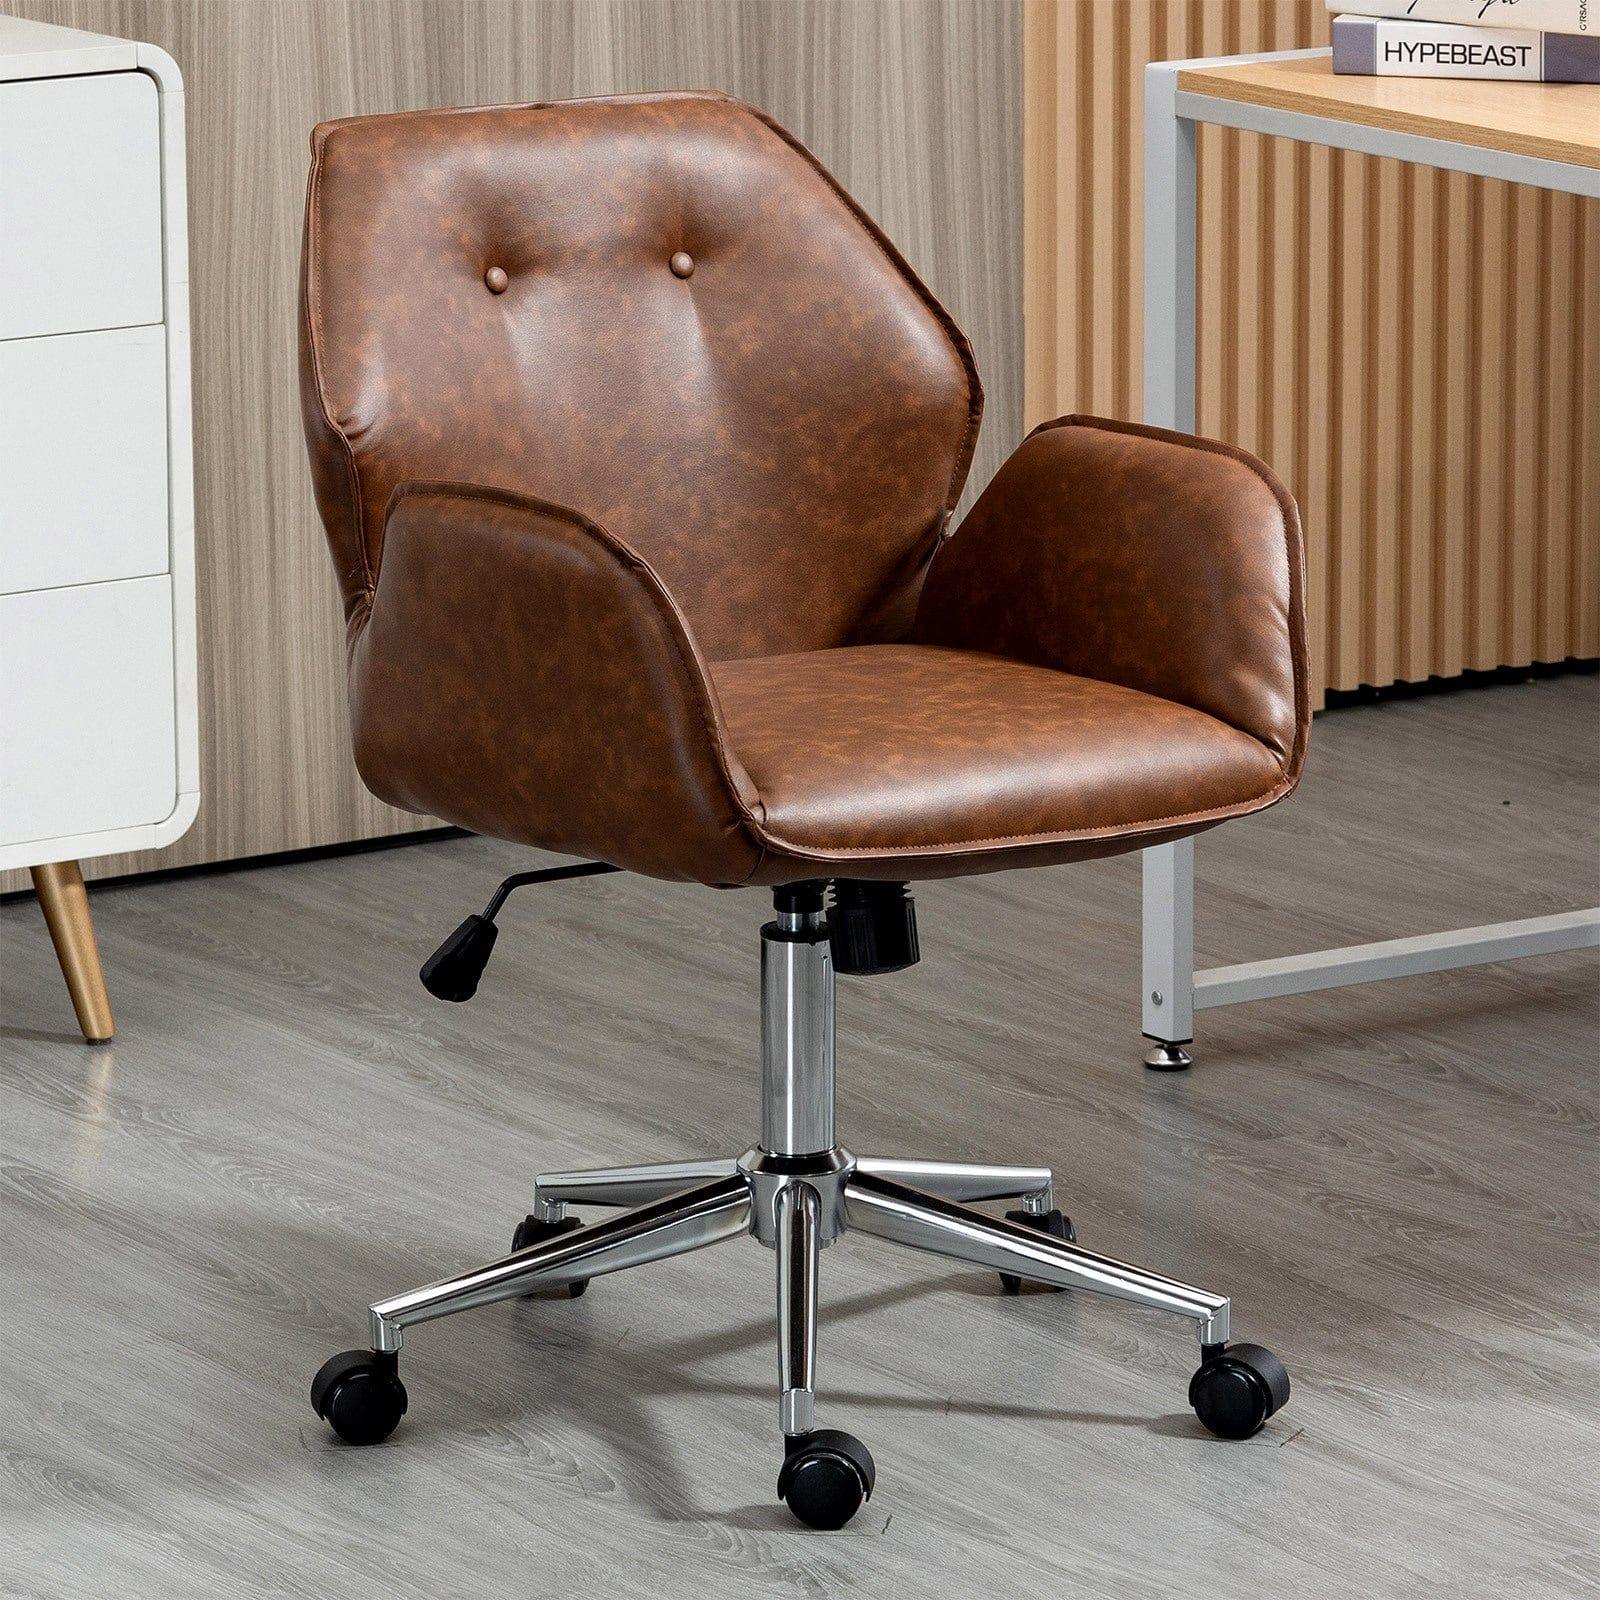 Shop Lower Price office furniture chair swivel  low back Nordic Home adjustable  Leather office chair Mademoiselle Home Decor